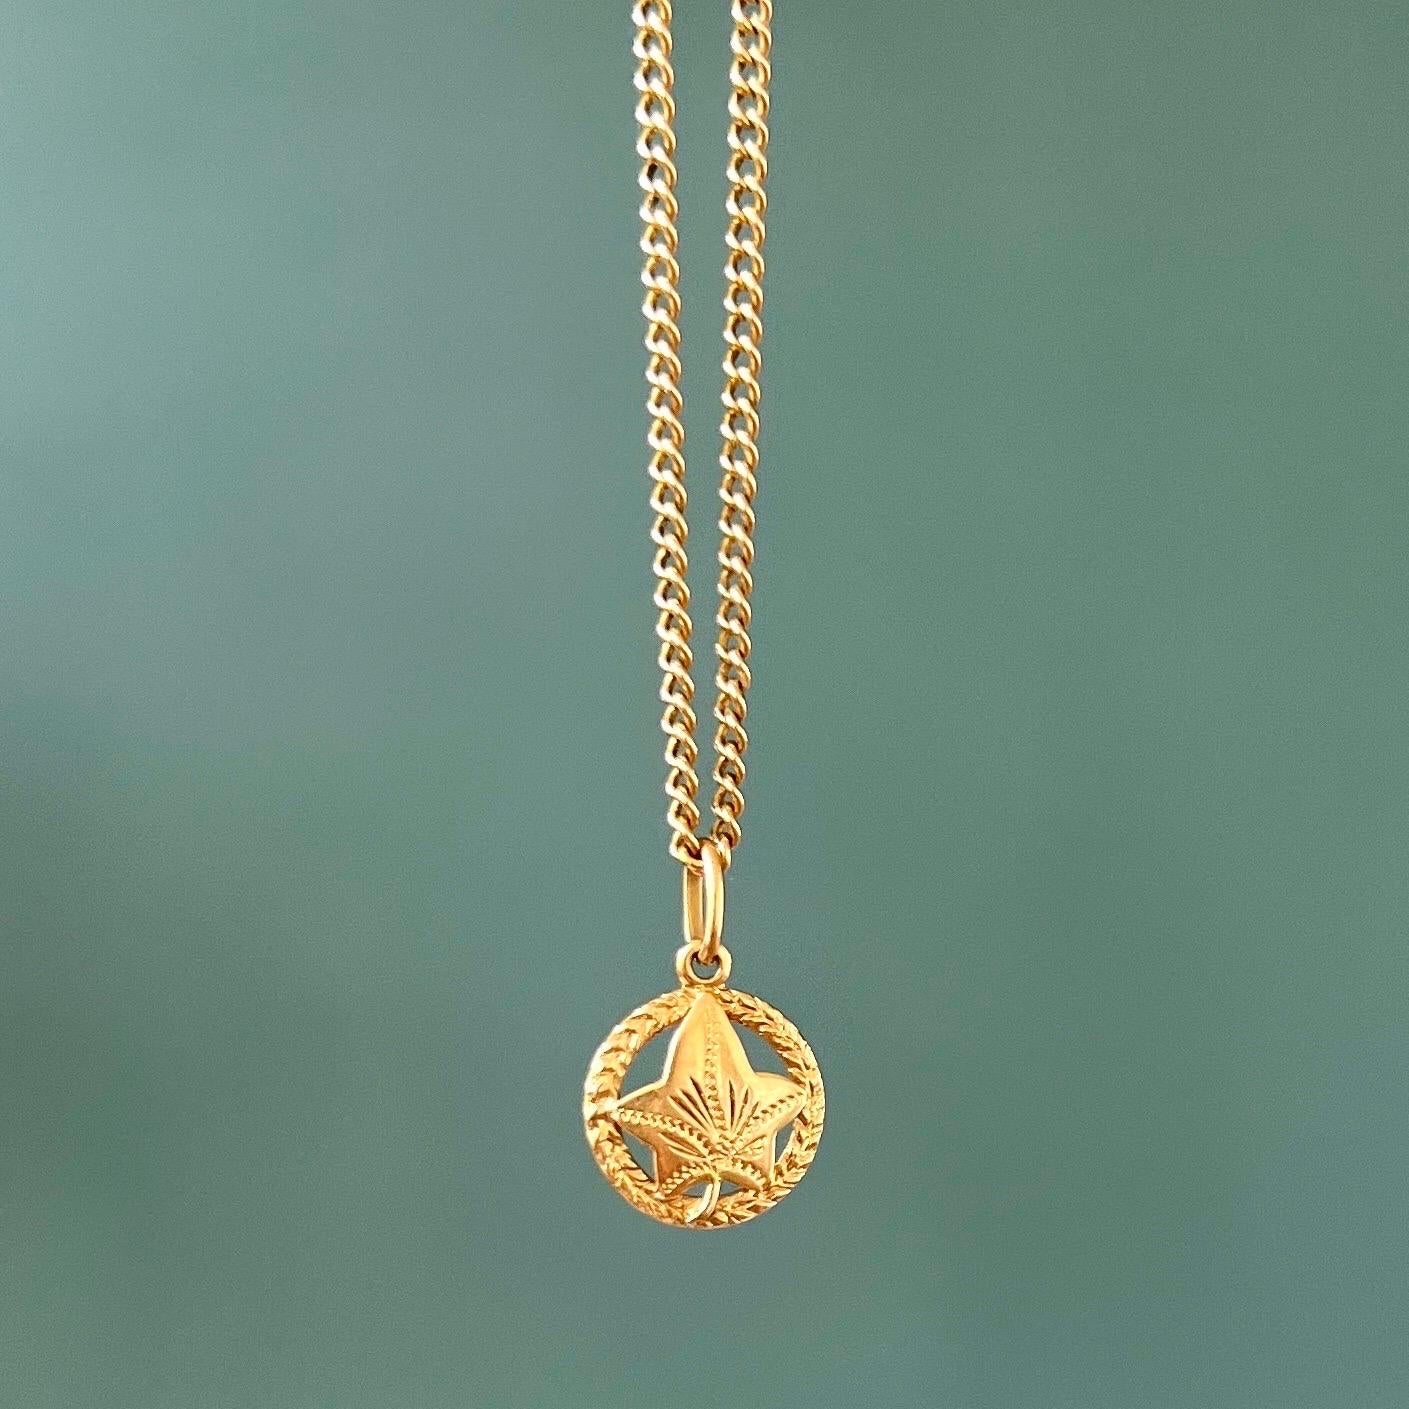 An Italian maple leaf 18 karat gold charm pendant. This maple leaf charm has a beautiful design with the typical leaf in the middle and surrounded by a wreath. Charms are great to collect as wearable memories, it has a symbolic and often a